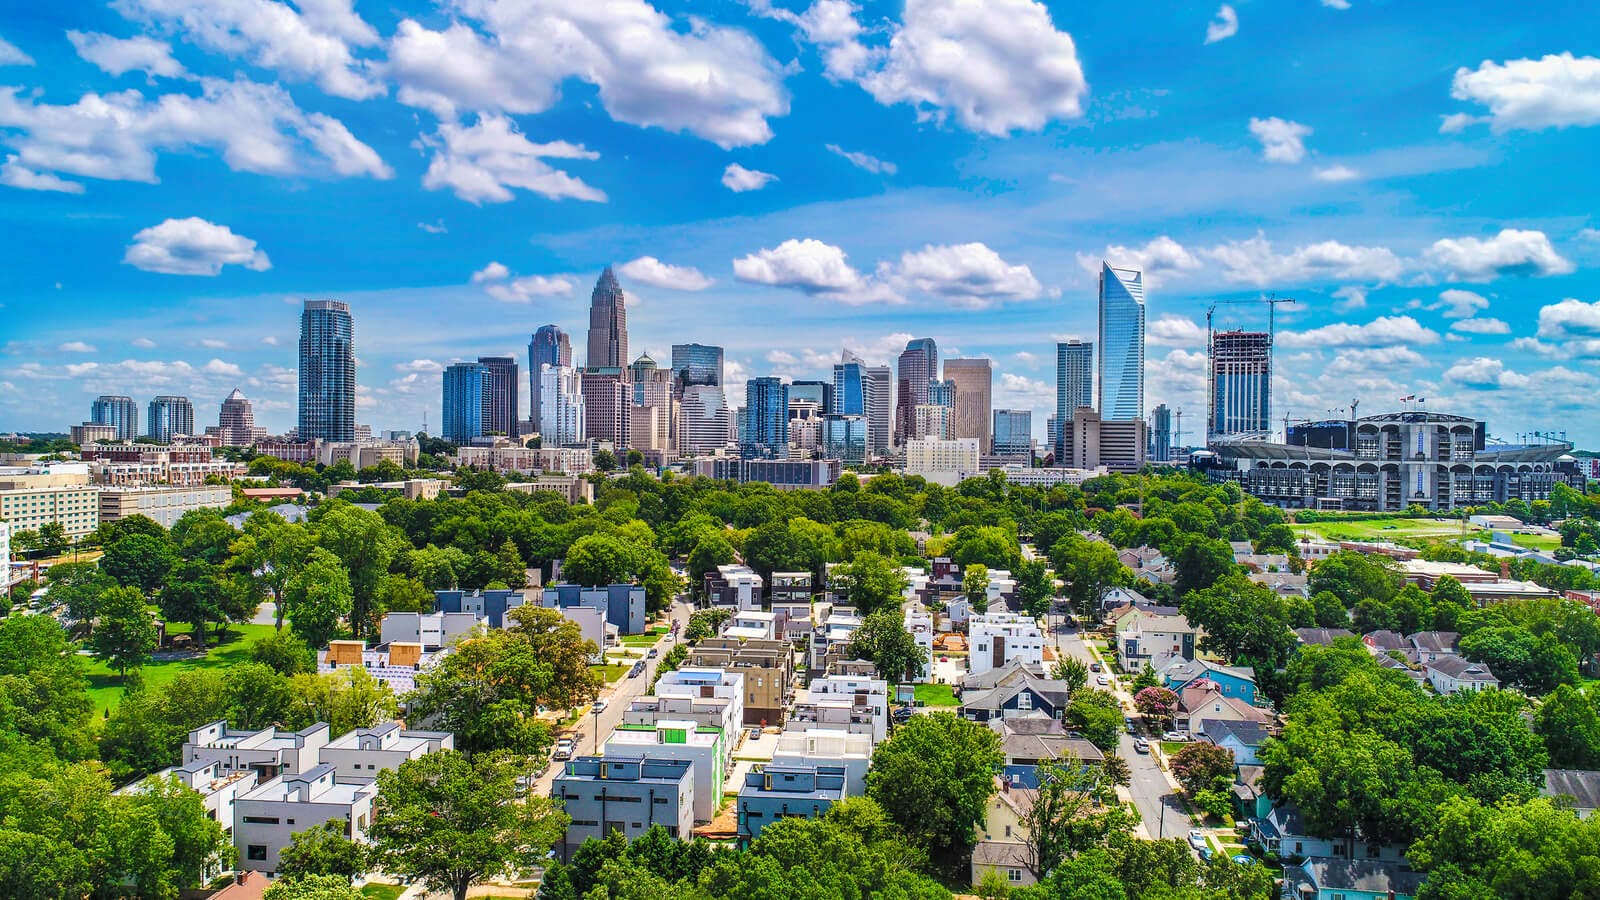 A panoramic shot of the city skyline of downtown Charlotte, North Carolina